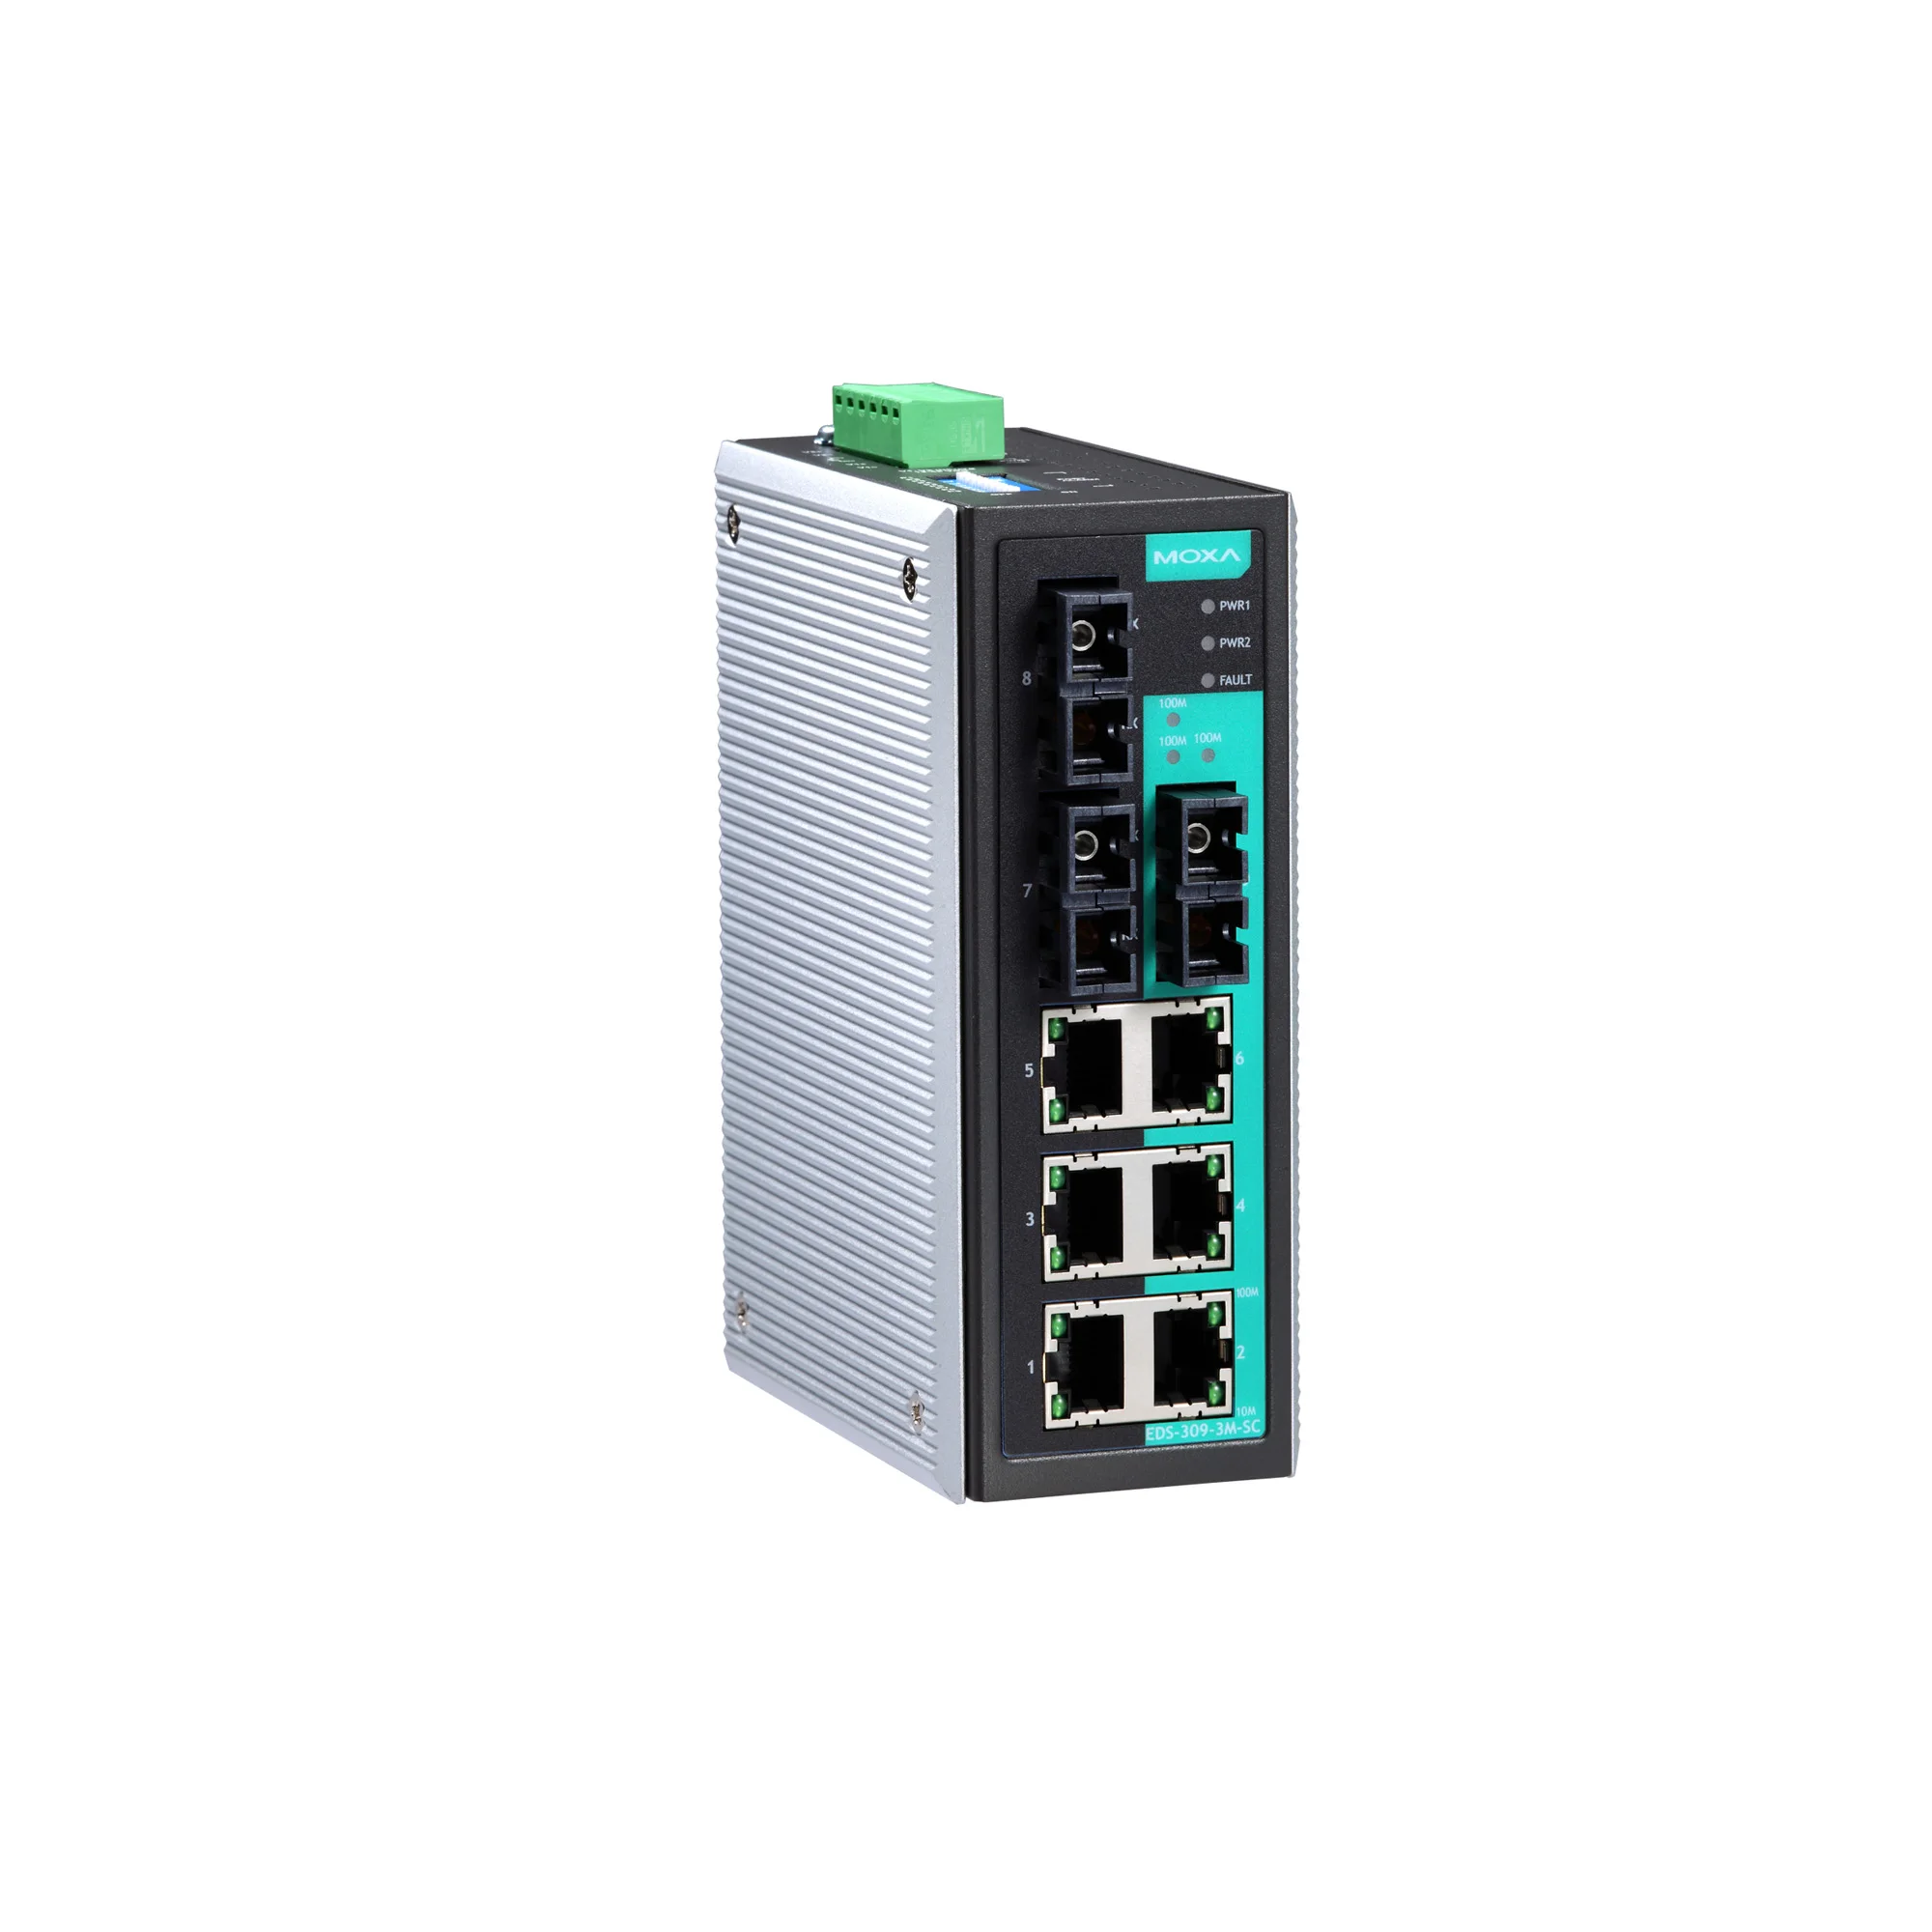 MOXA Unmanaged Industrial Internet Ethernet Switch EDS-309 series metal shell Network Switch 9 Port